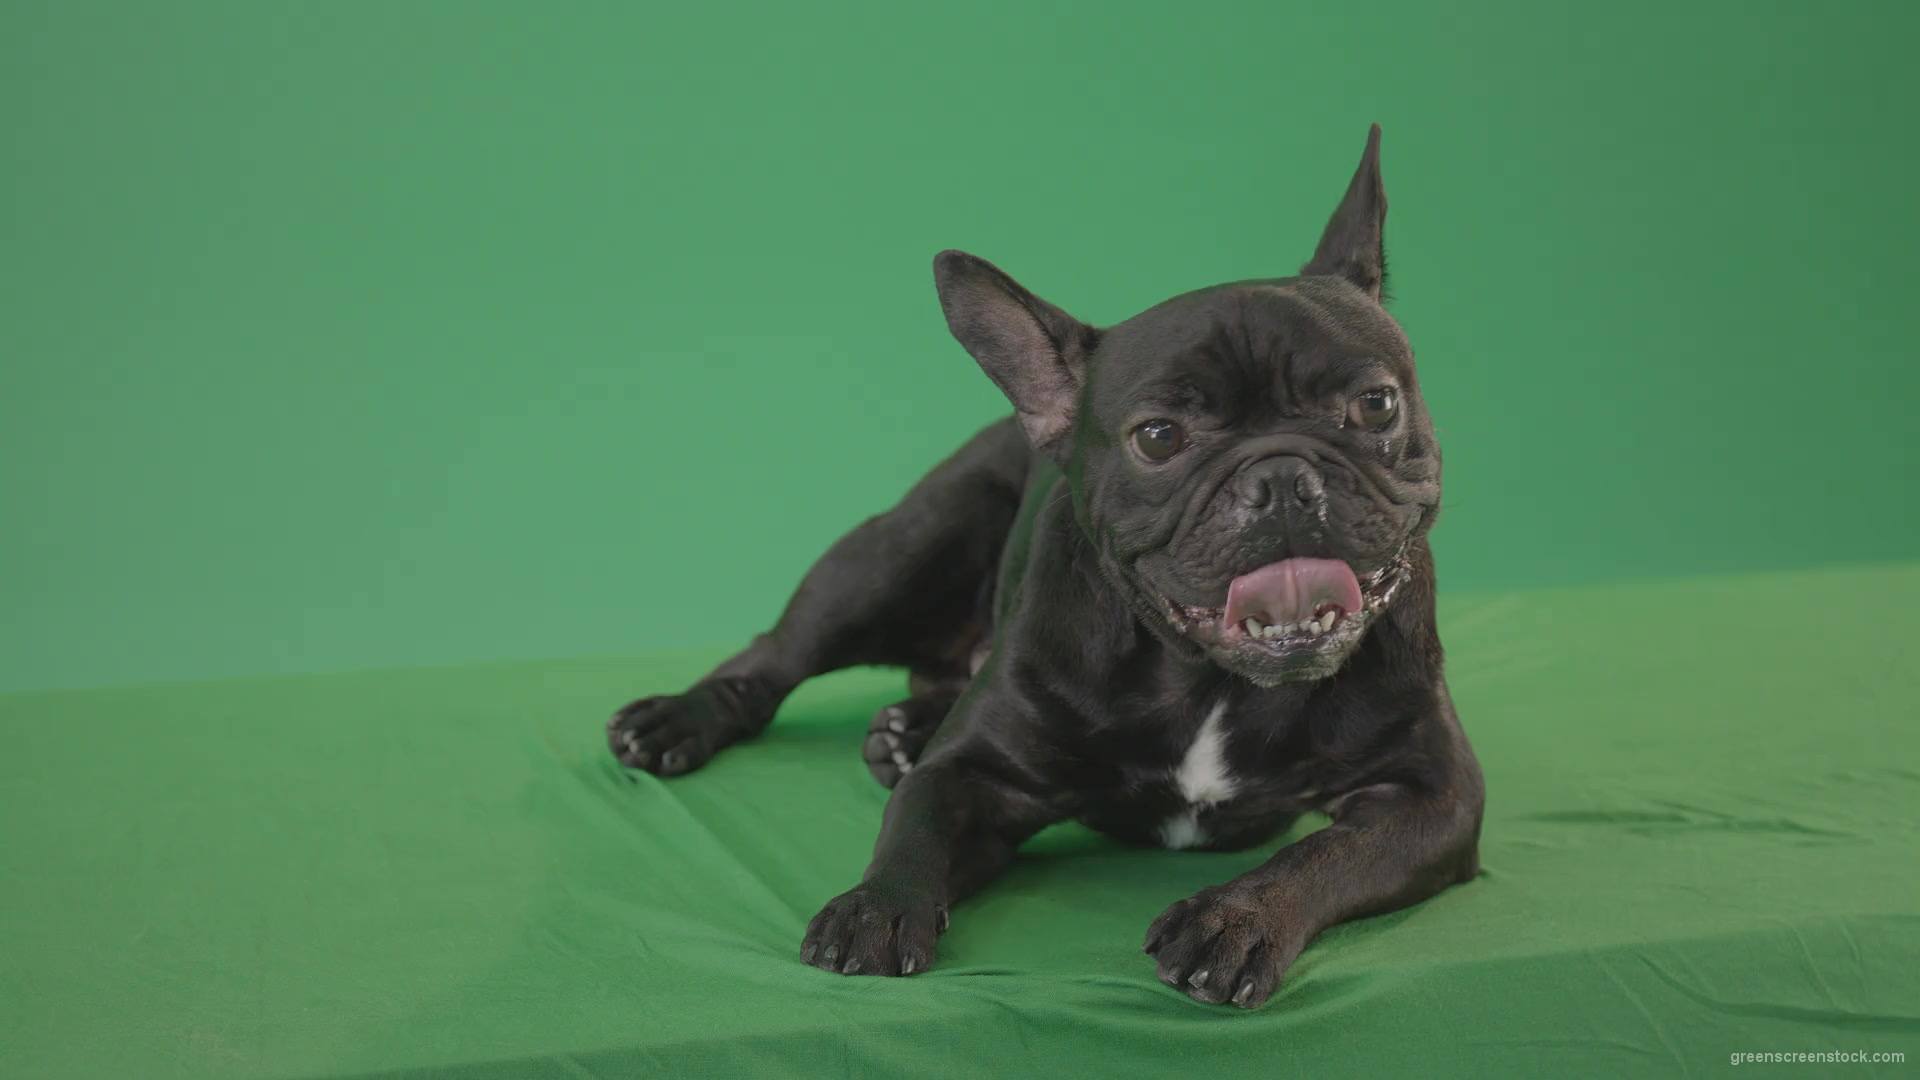 Boring-black-French-Bulldog-chilling-like-a-Bos-on-green-screen-4K-Video-Footage-1920_001 Green Screen Stock